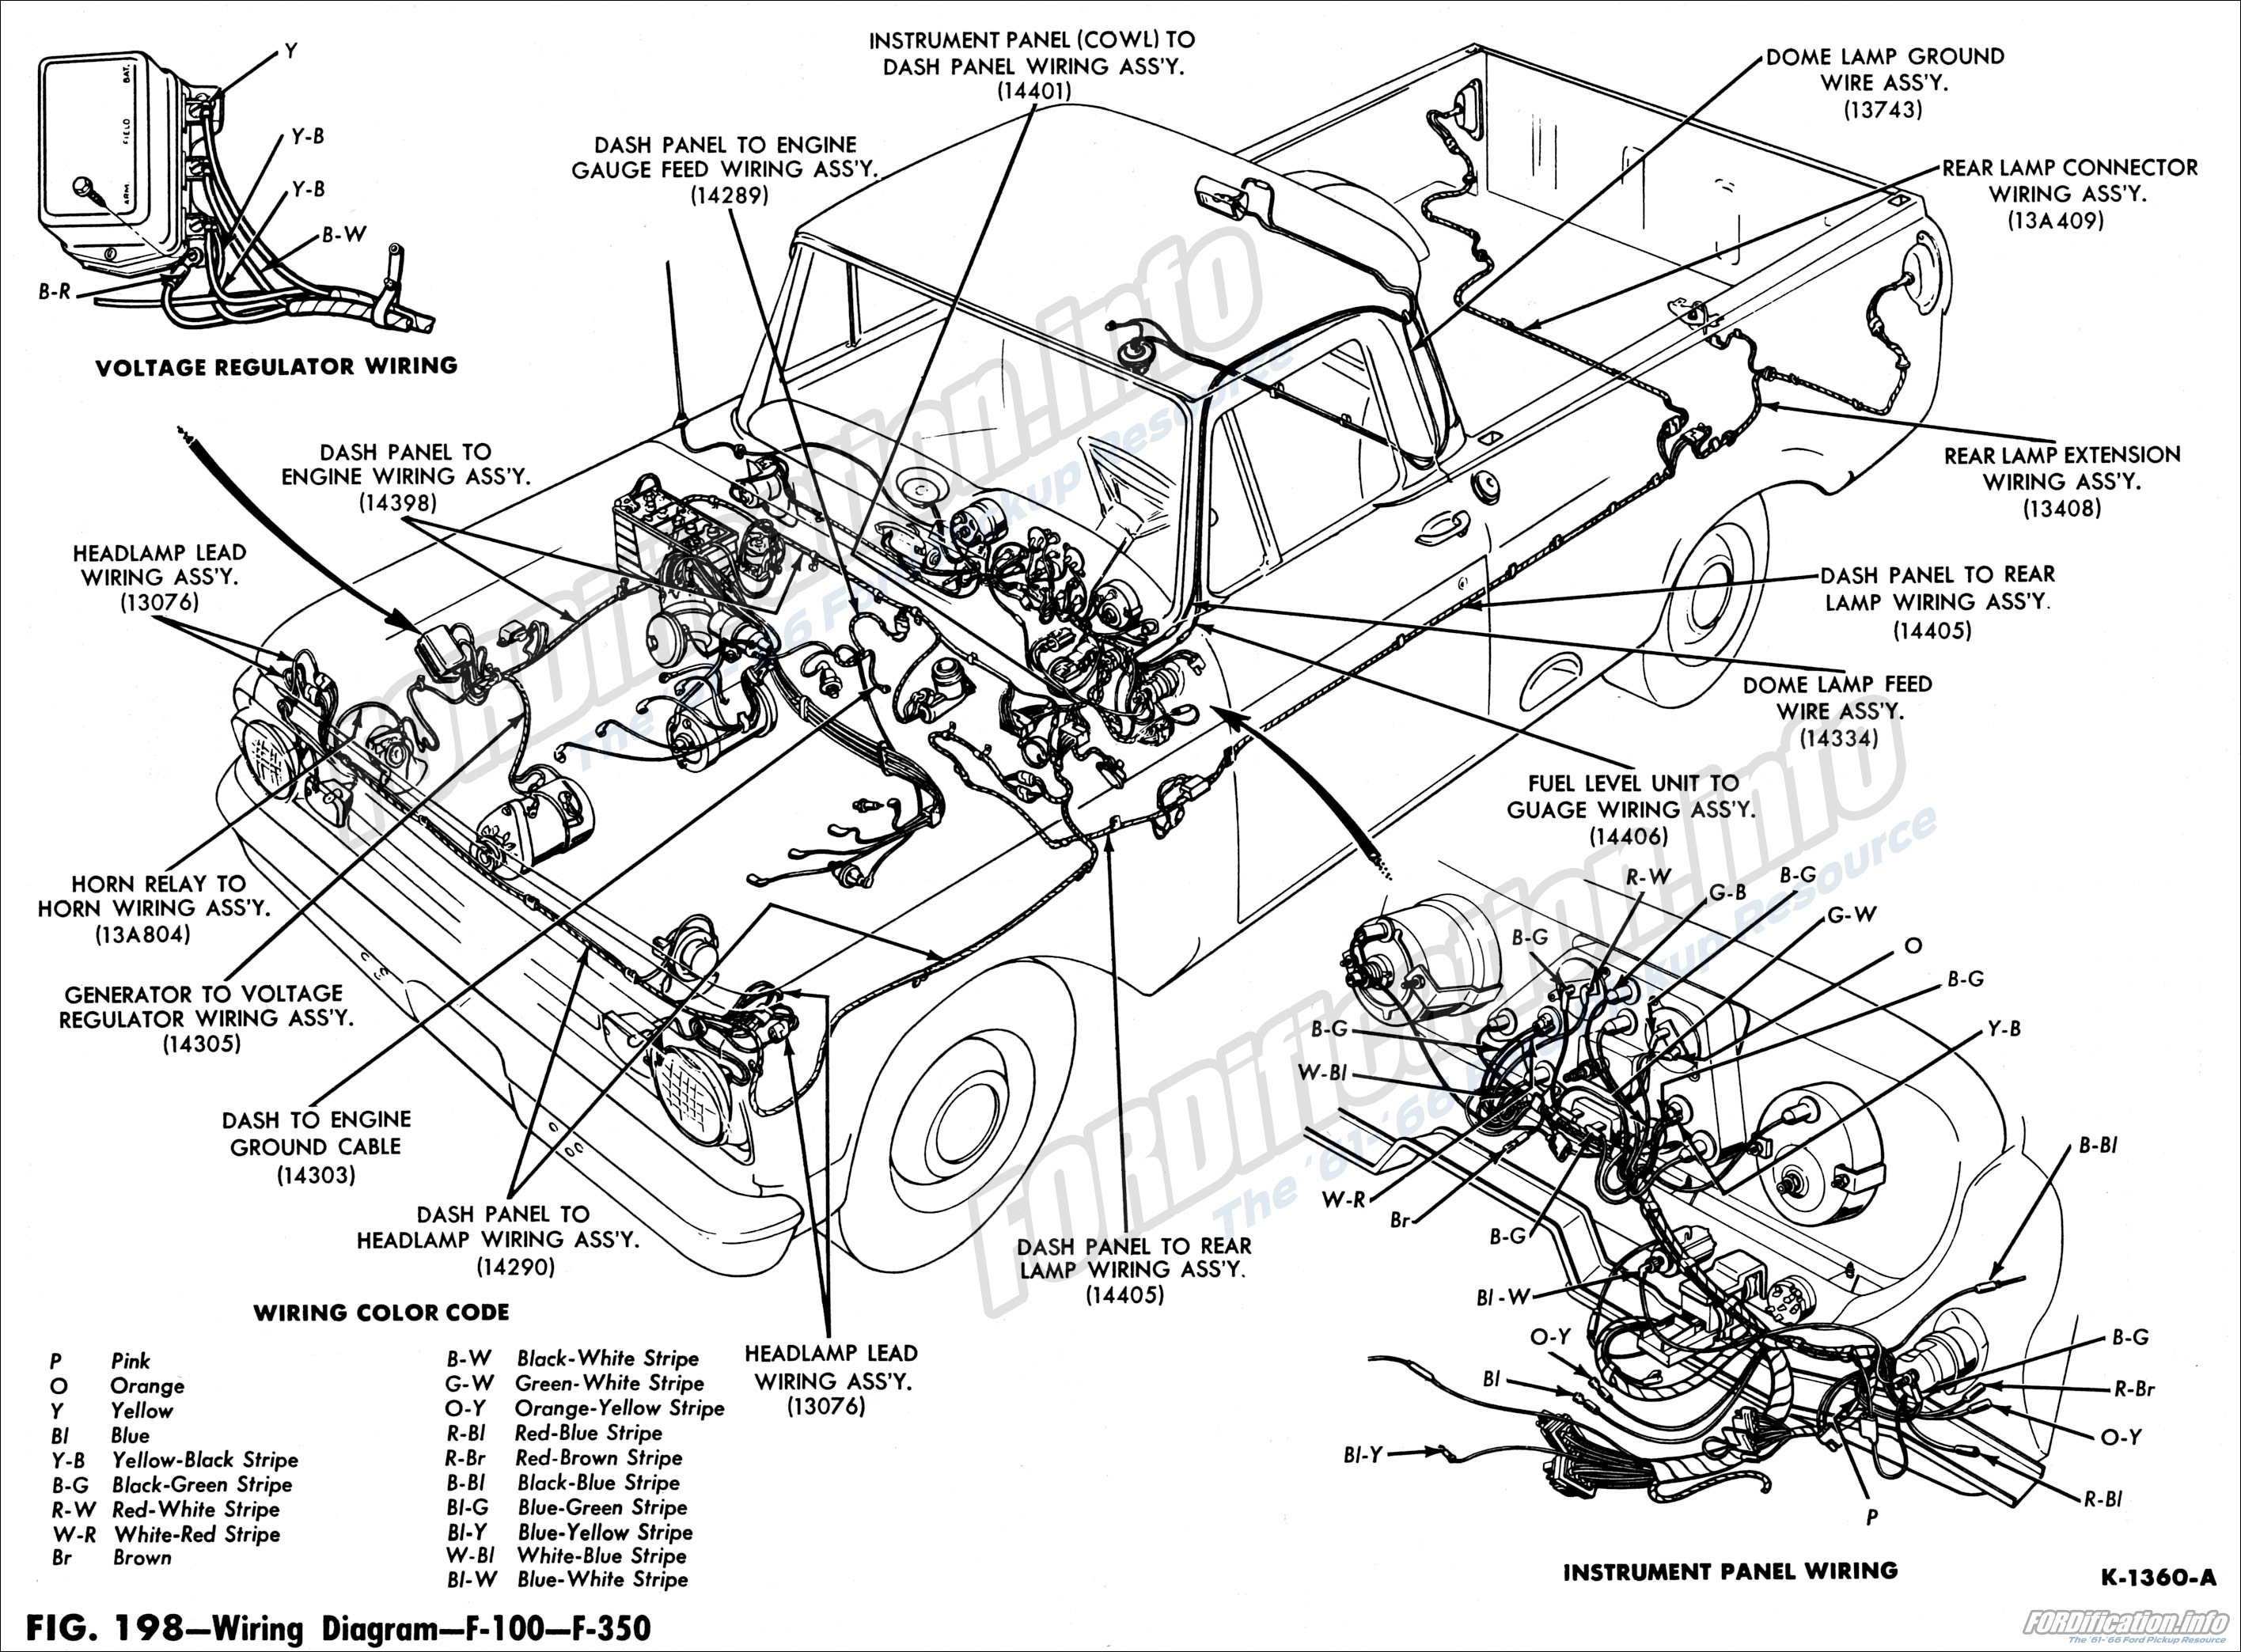 1963 Ford F100 Wiring Diagram from www.fordification.info